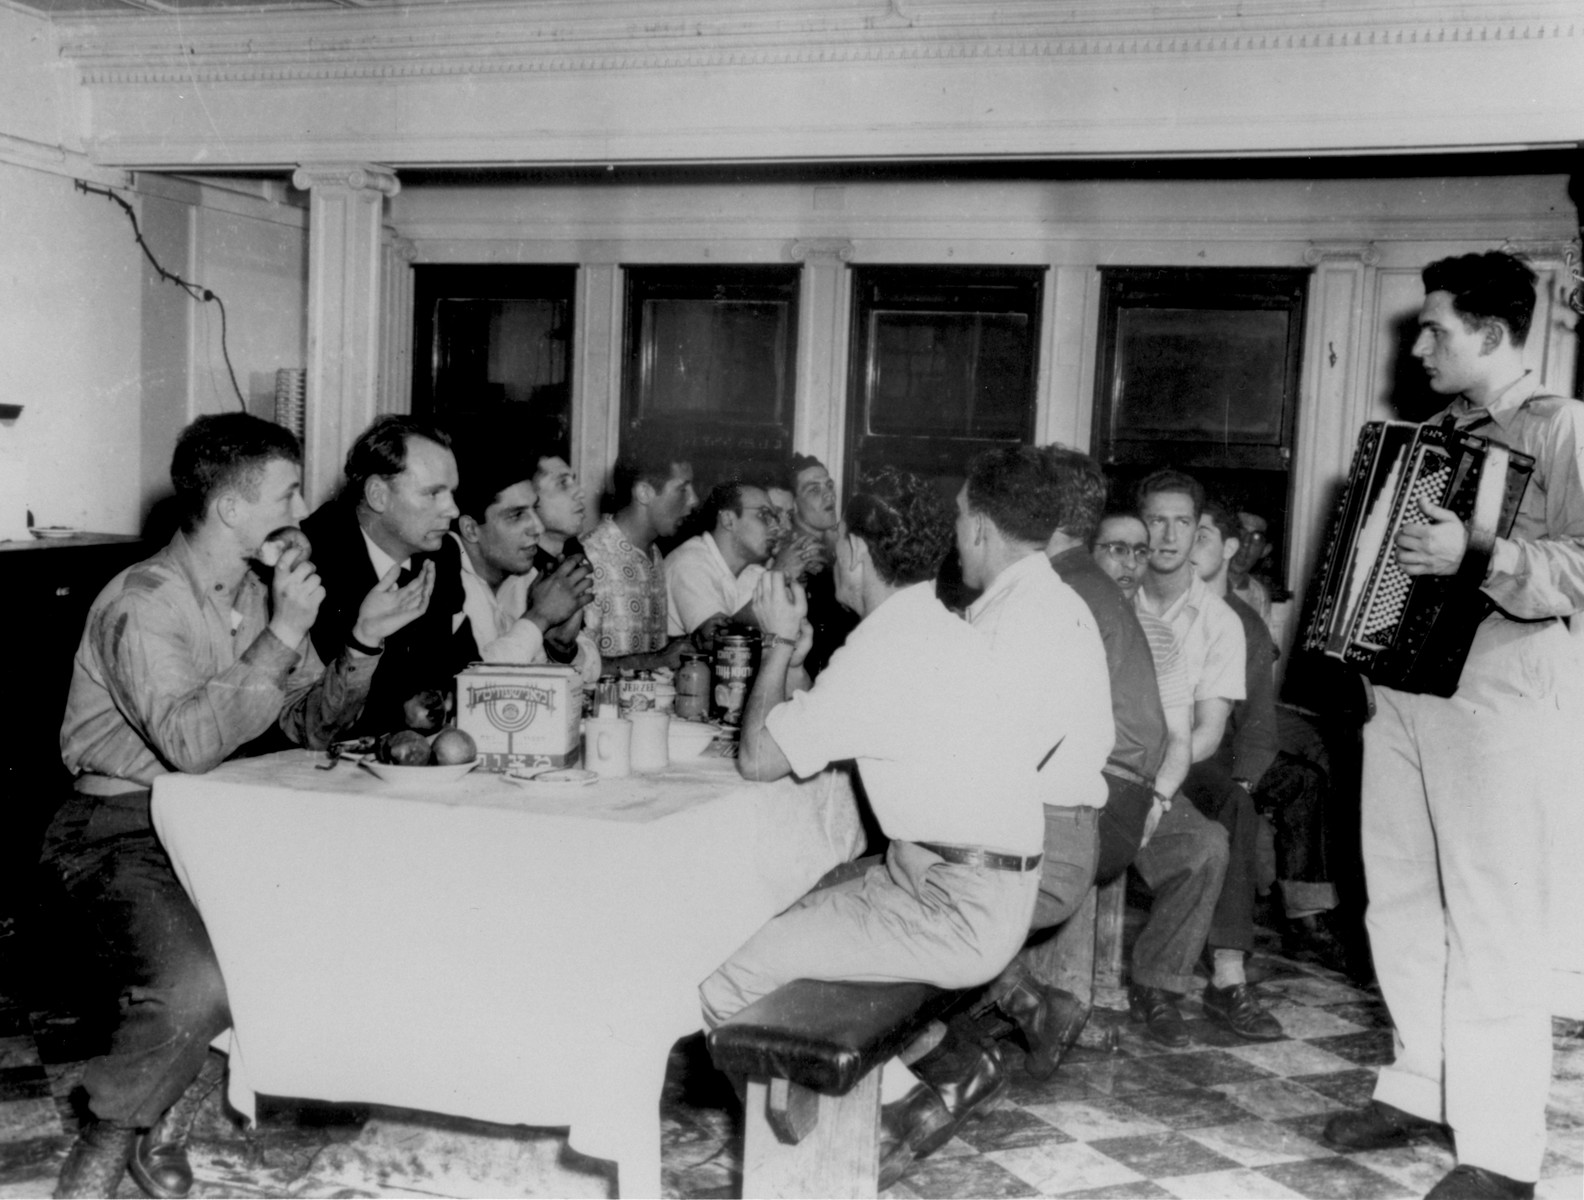 The crew of the Exodus 1947 attends a Passover seder in the ship's mess while en route from the United States to Europe.

The accordian player is William (Vevie) Siegel.  Pictured to the left of the accordian player are Al Naftel and Murray Aronoff.  On the left side of the table, the first four crew members from left to right are: Bentley Forman, John Grauel, Dov Mills and Avraham Siegel.  Pictured seated second from the left is Donald Molofsky, an American crewmember on the Exodus.